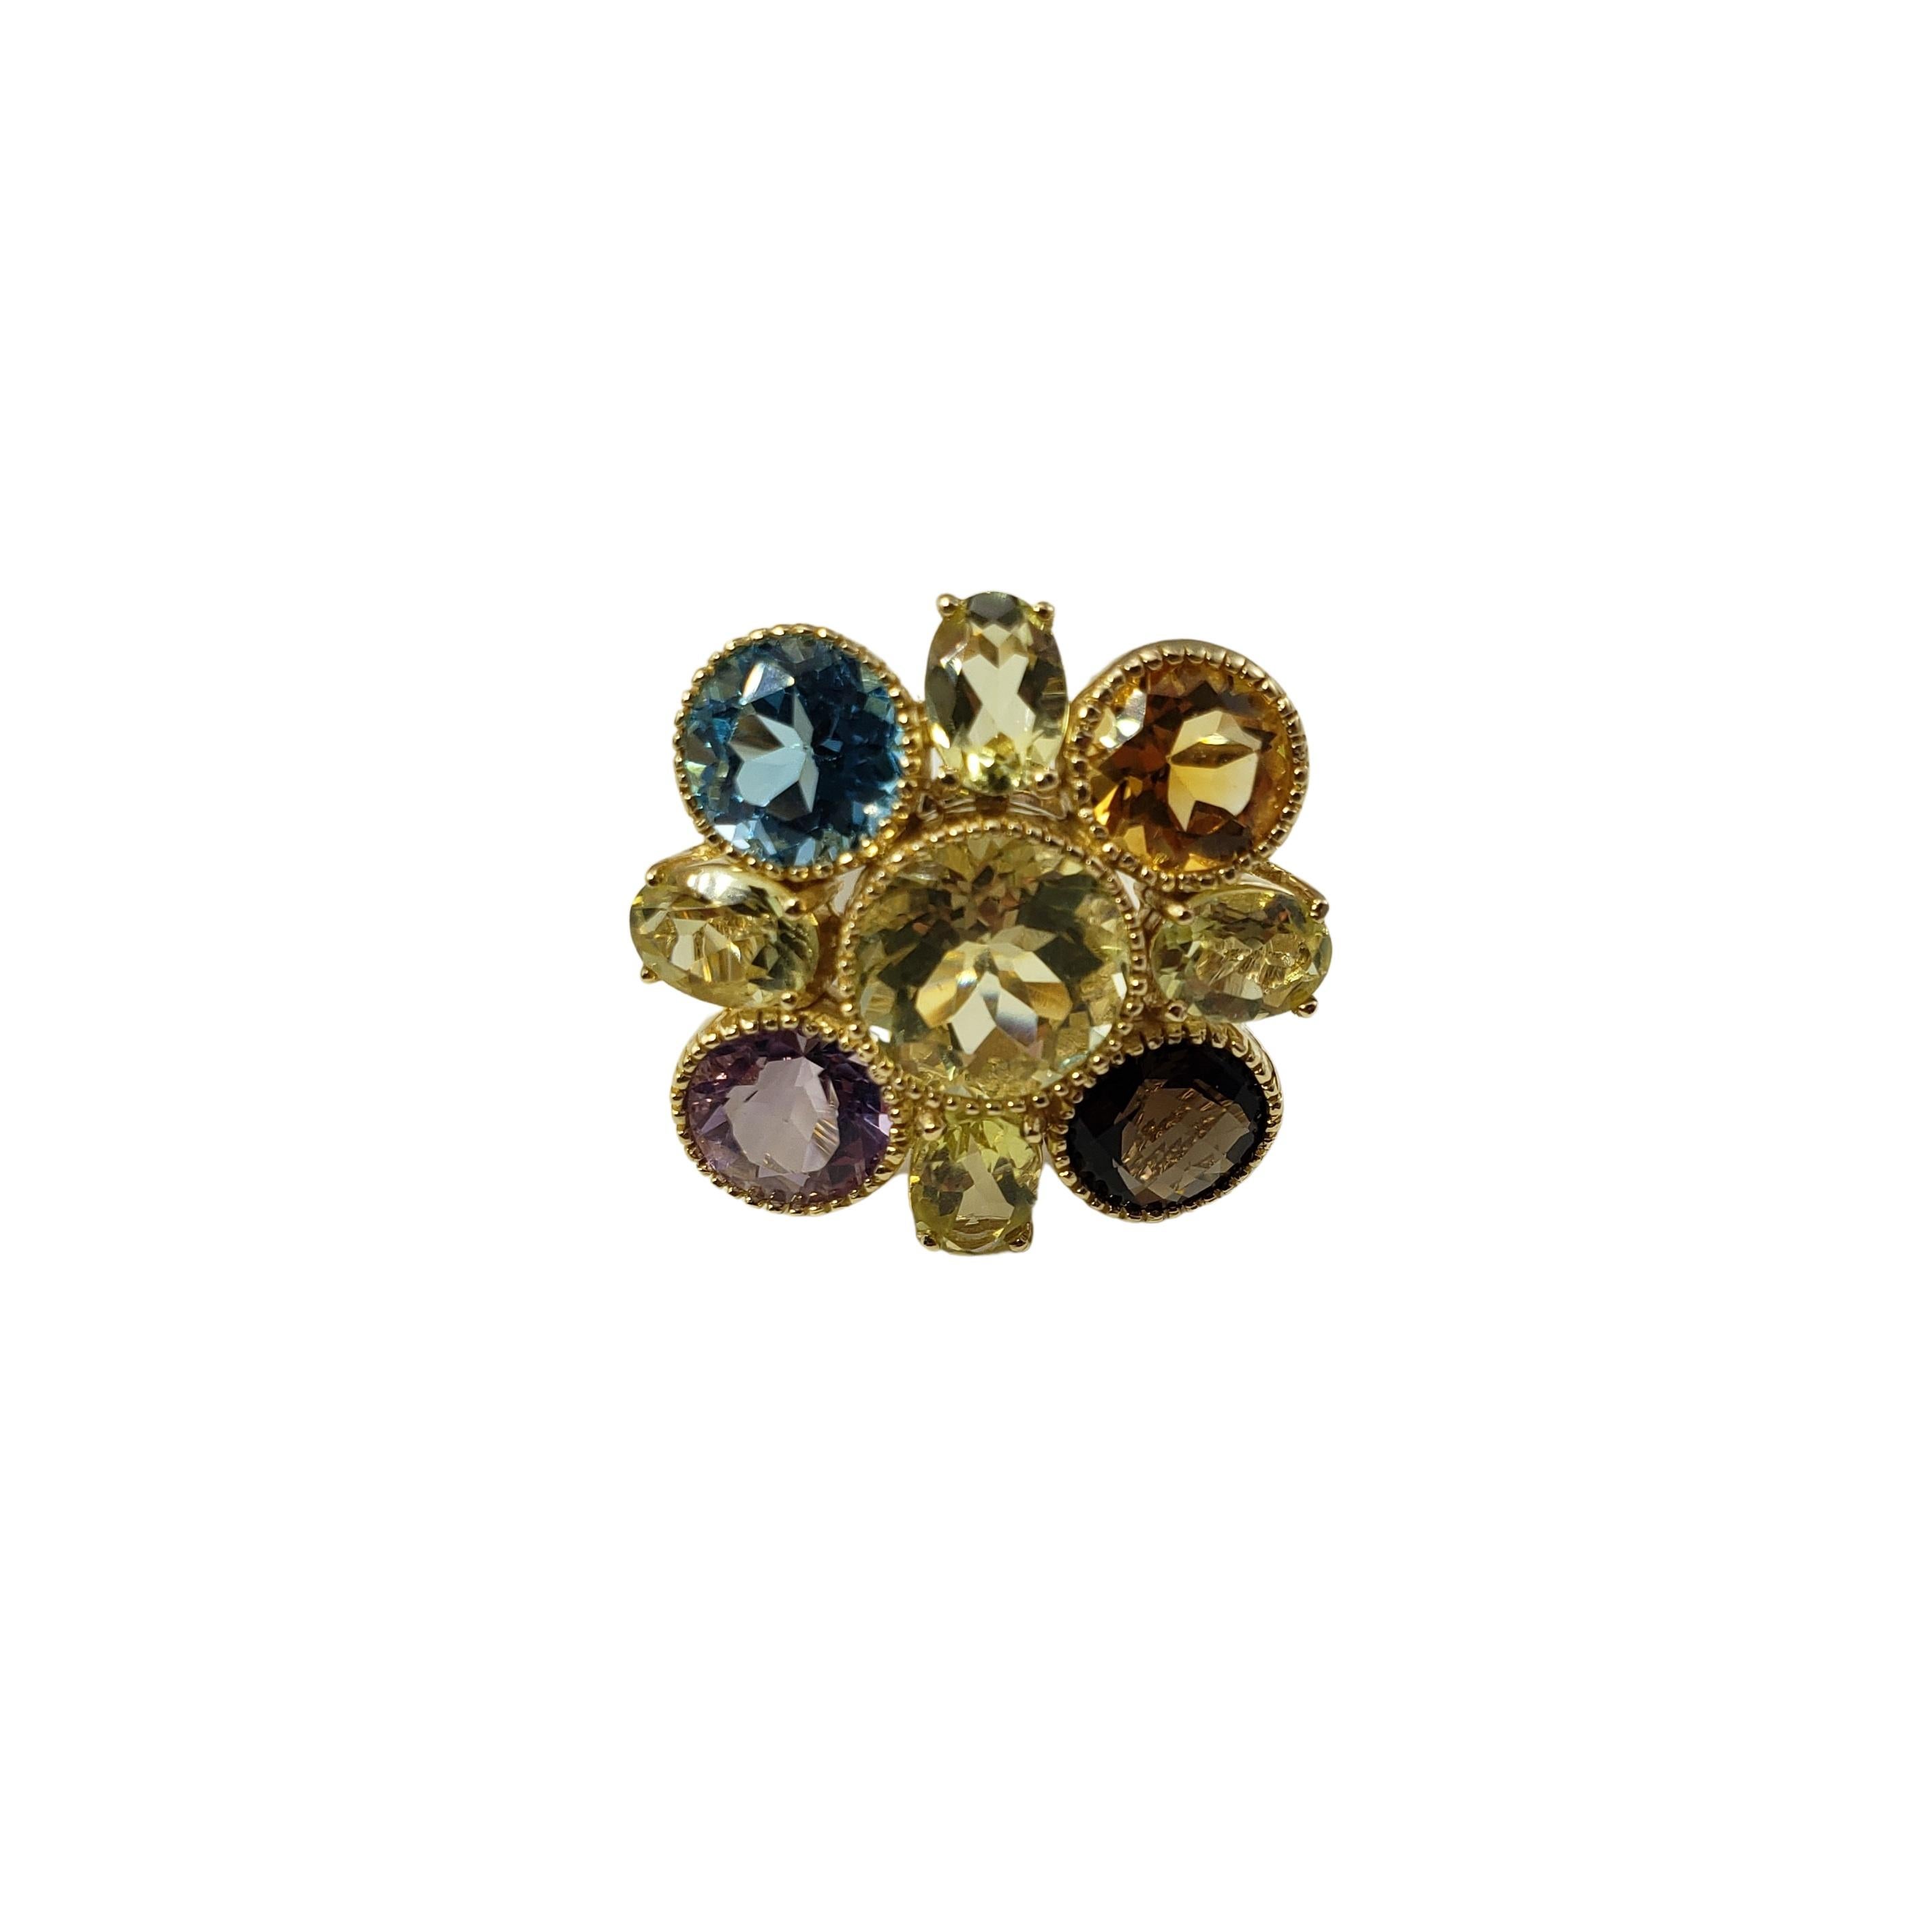 14 Karat Yellow Gold and Gemstone Ring Size 8.25 GAI Certified-

This stunning ring features topaz, amethyst, smokey quartz and citrine gemstones set in beautifully detailed 14K yellow gold.
Width:  26 mm.  Shank:  3 mm.

Total gemstone weight: 